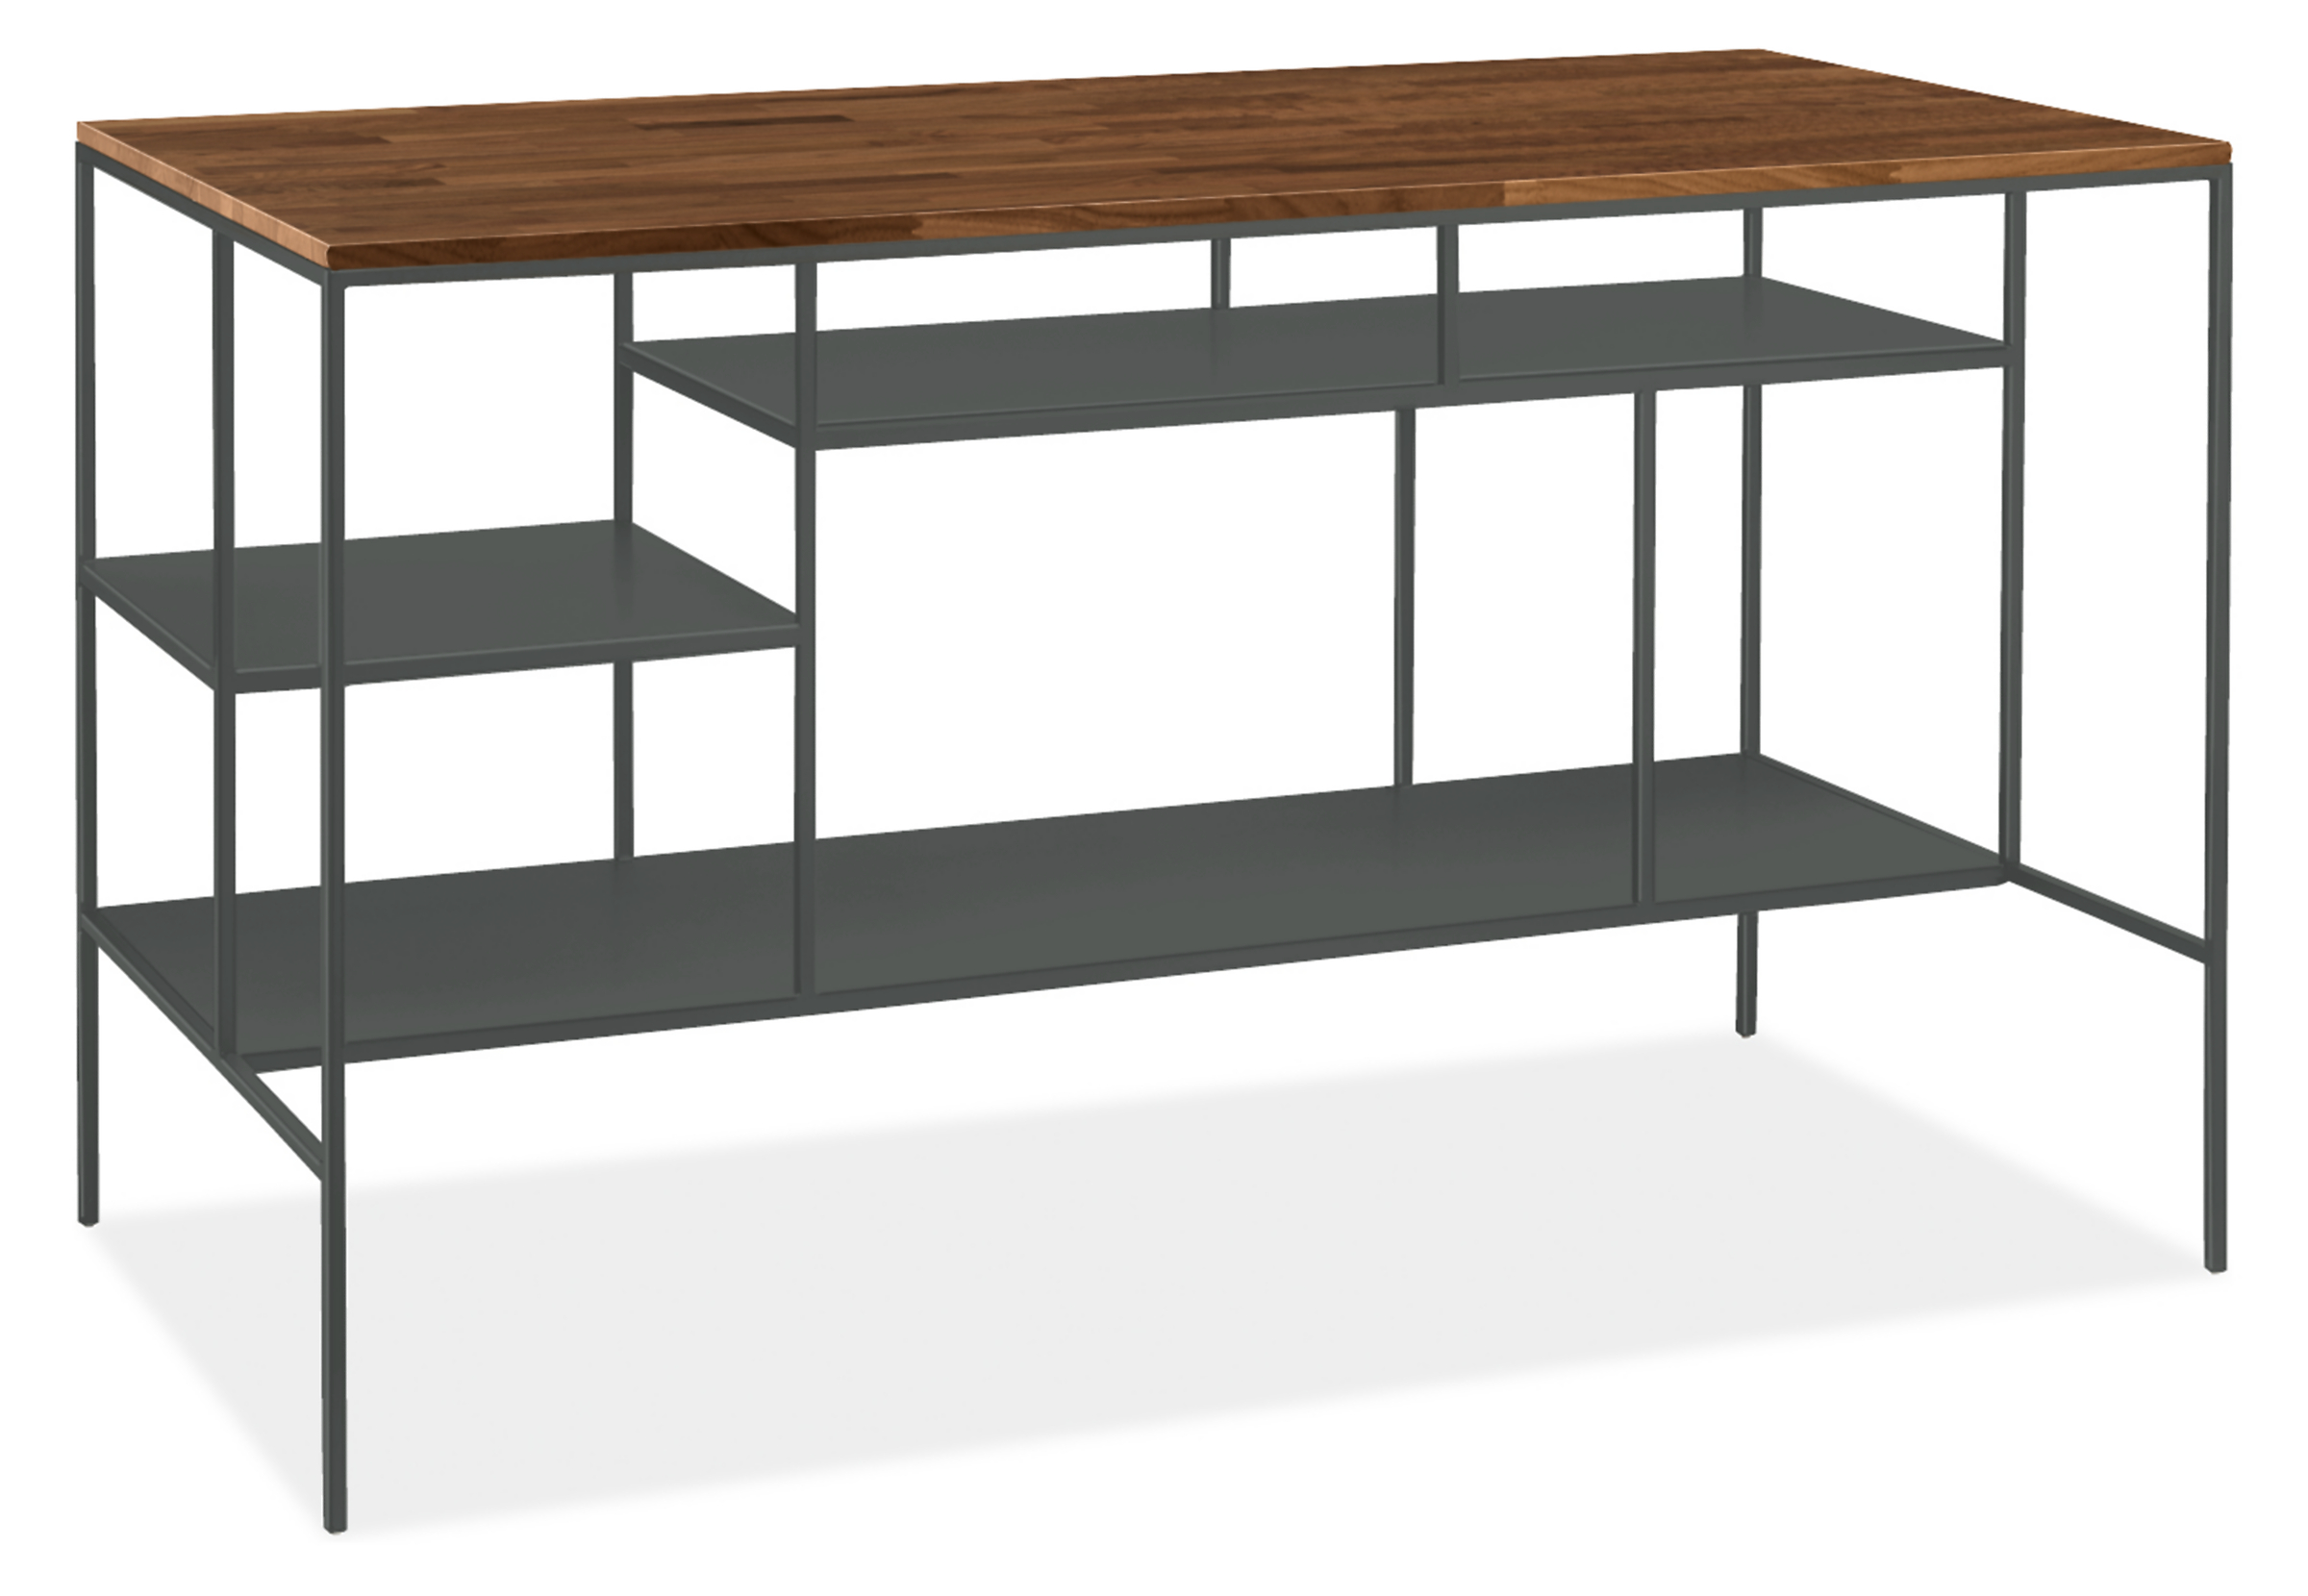 Bowen 60w 30d 36h Counter Table with Narrow Shelves